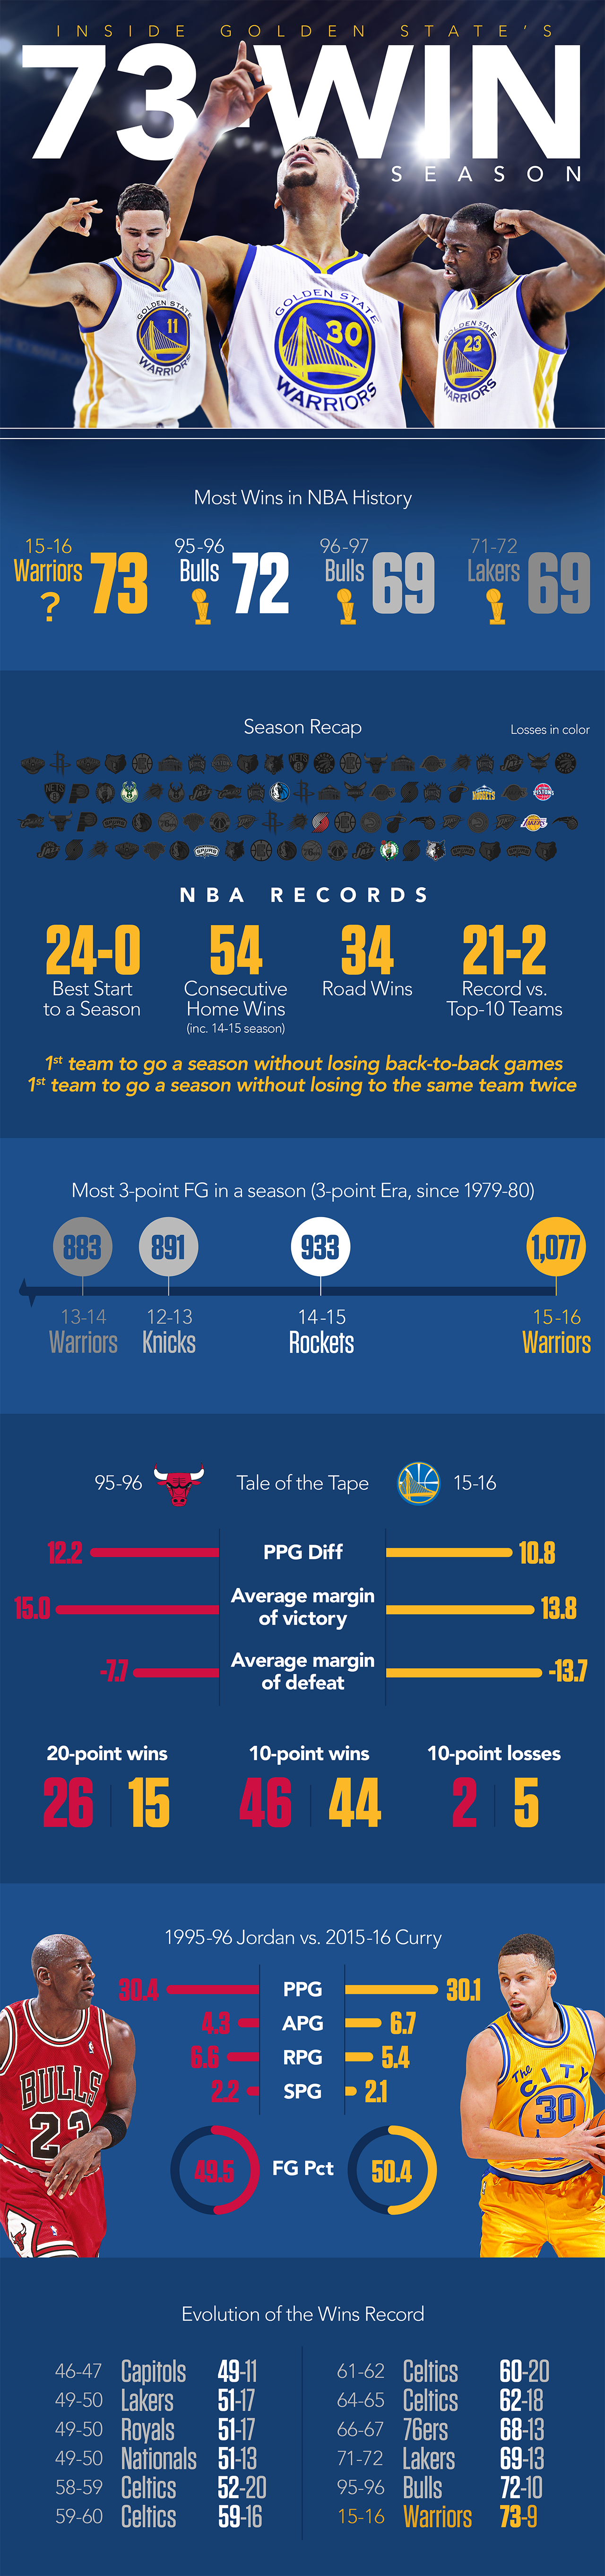 Infographic Inside The Golden State Warriors 73 Win Season Stats 